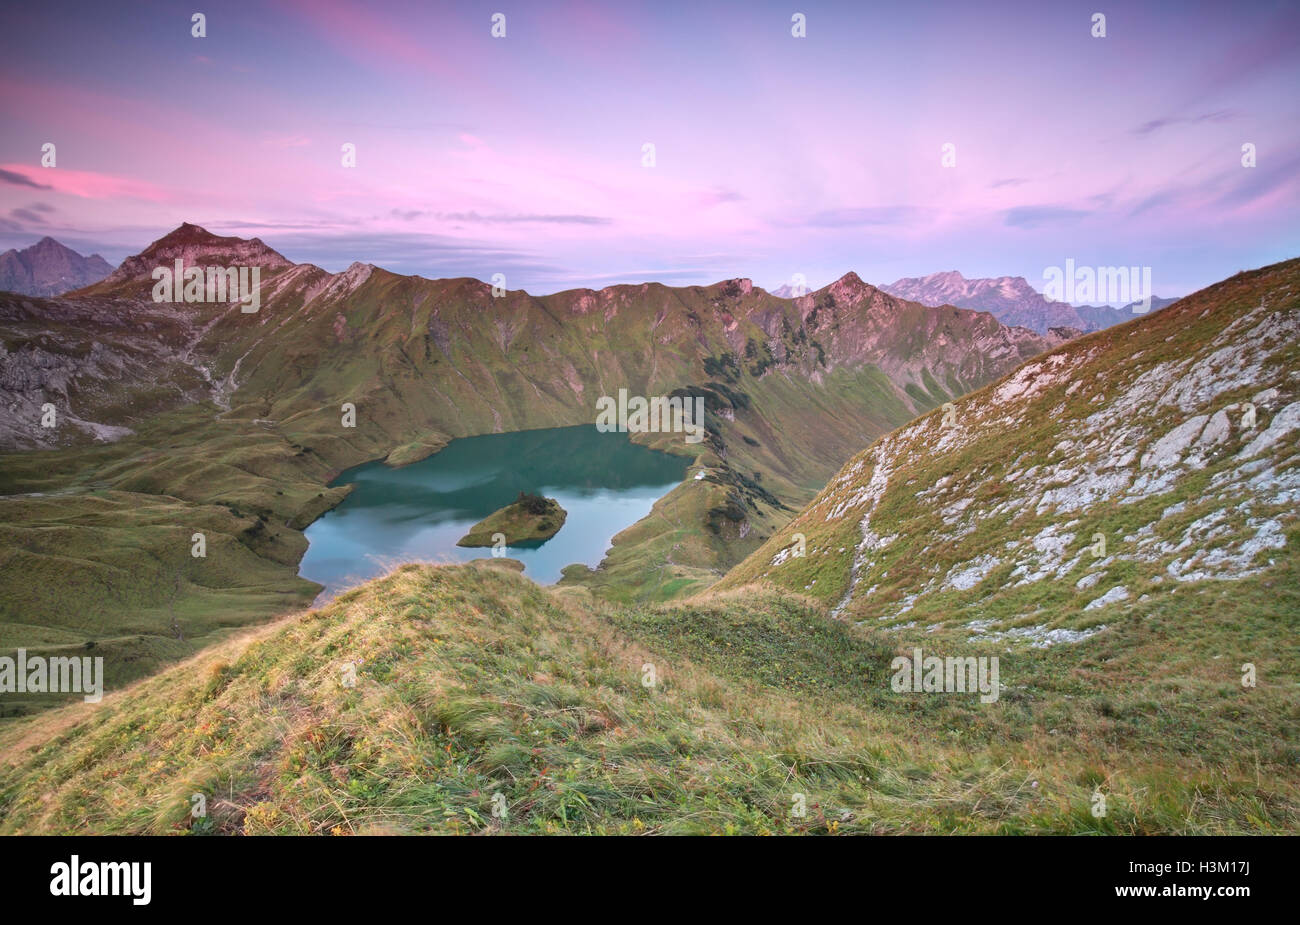 alpine lake Schtecksee at sunrise, view from mountaintop Stock Photo